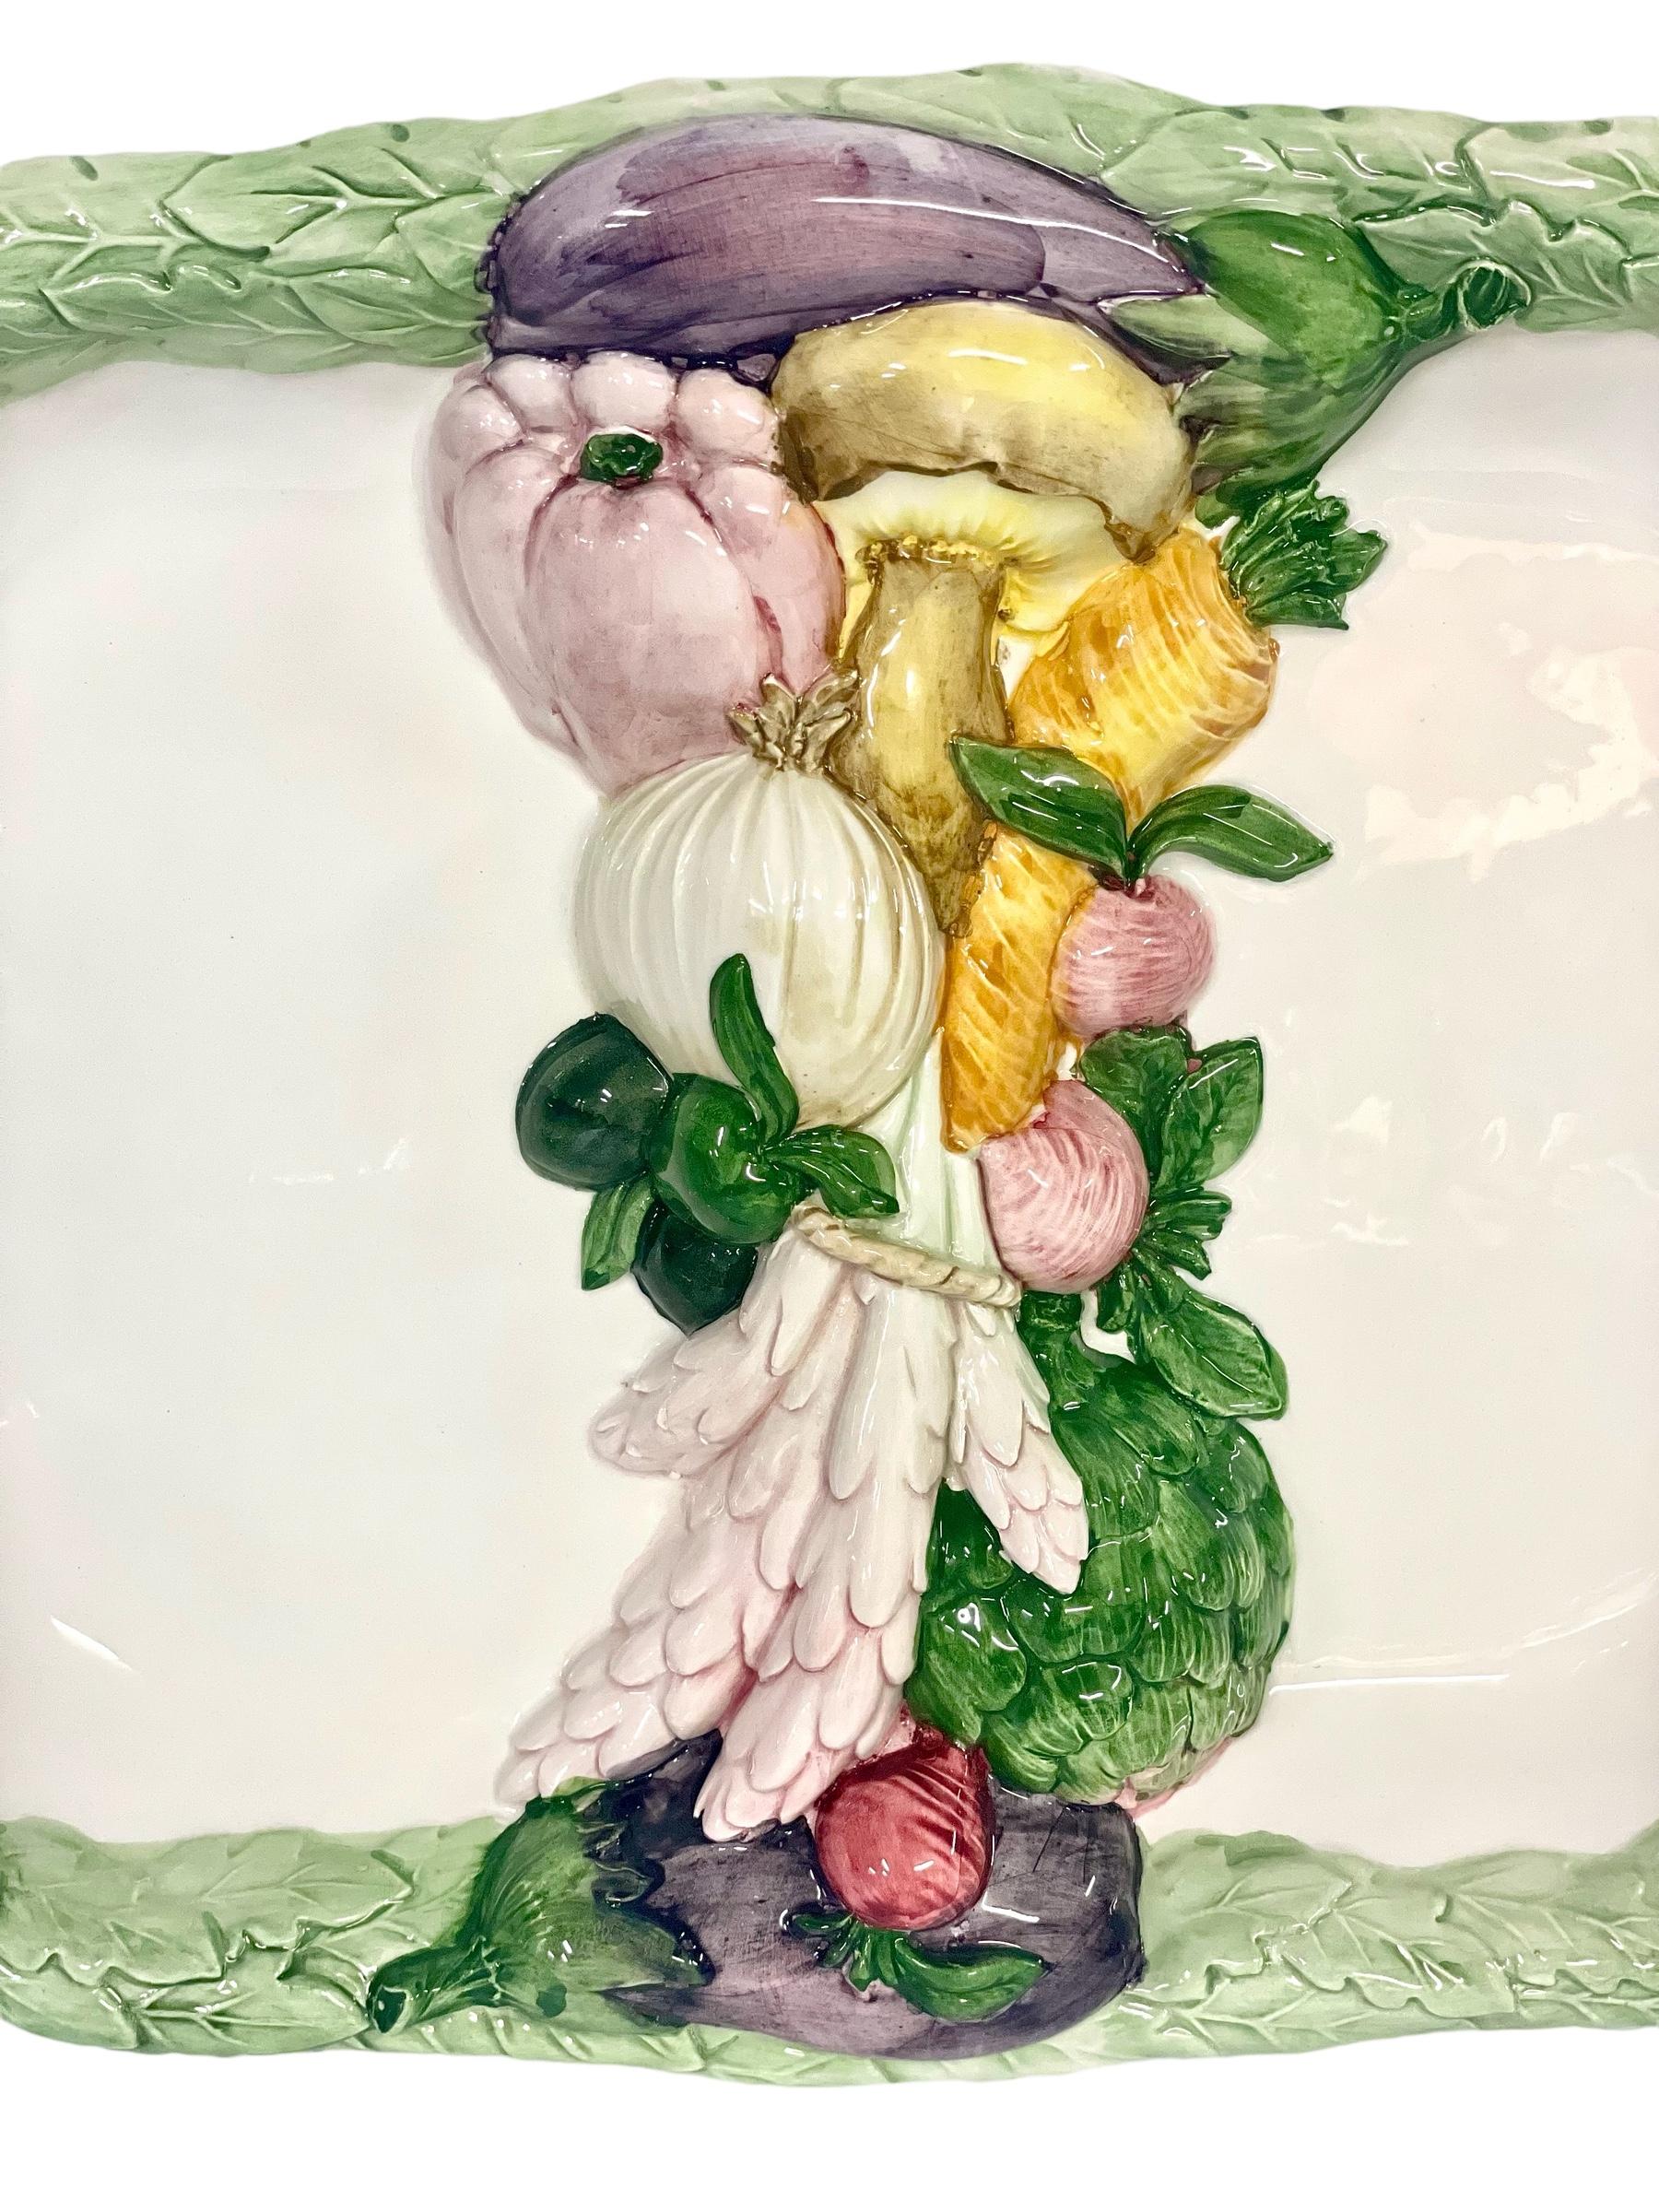 An attractive and unusual vintage serving platter, embellished with a central divider of beautifully crafted and hand-painted garden vegetables. A raised, embossed and painted green foliage border forms the rim of this elongated hexagonal plate,